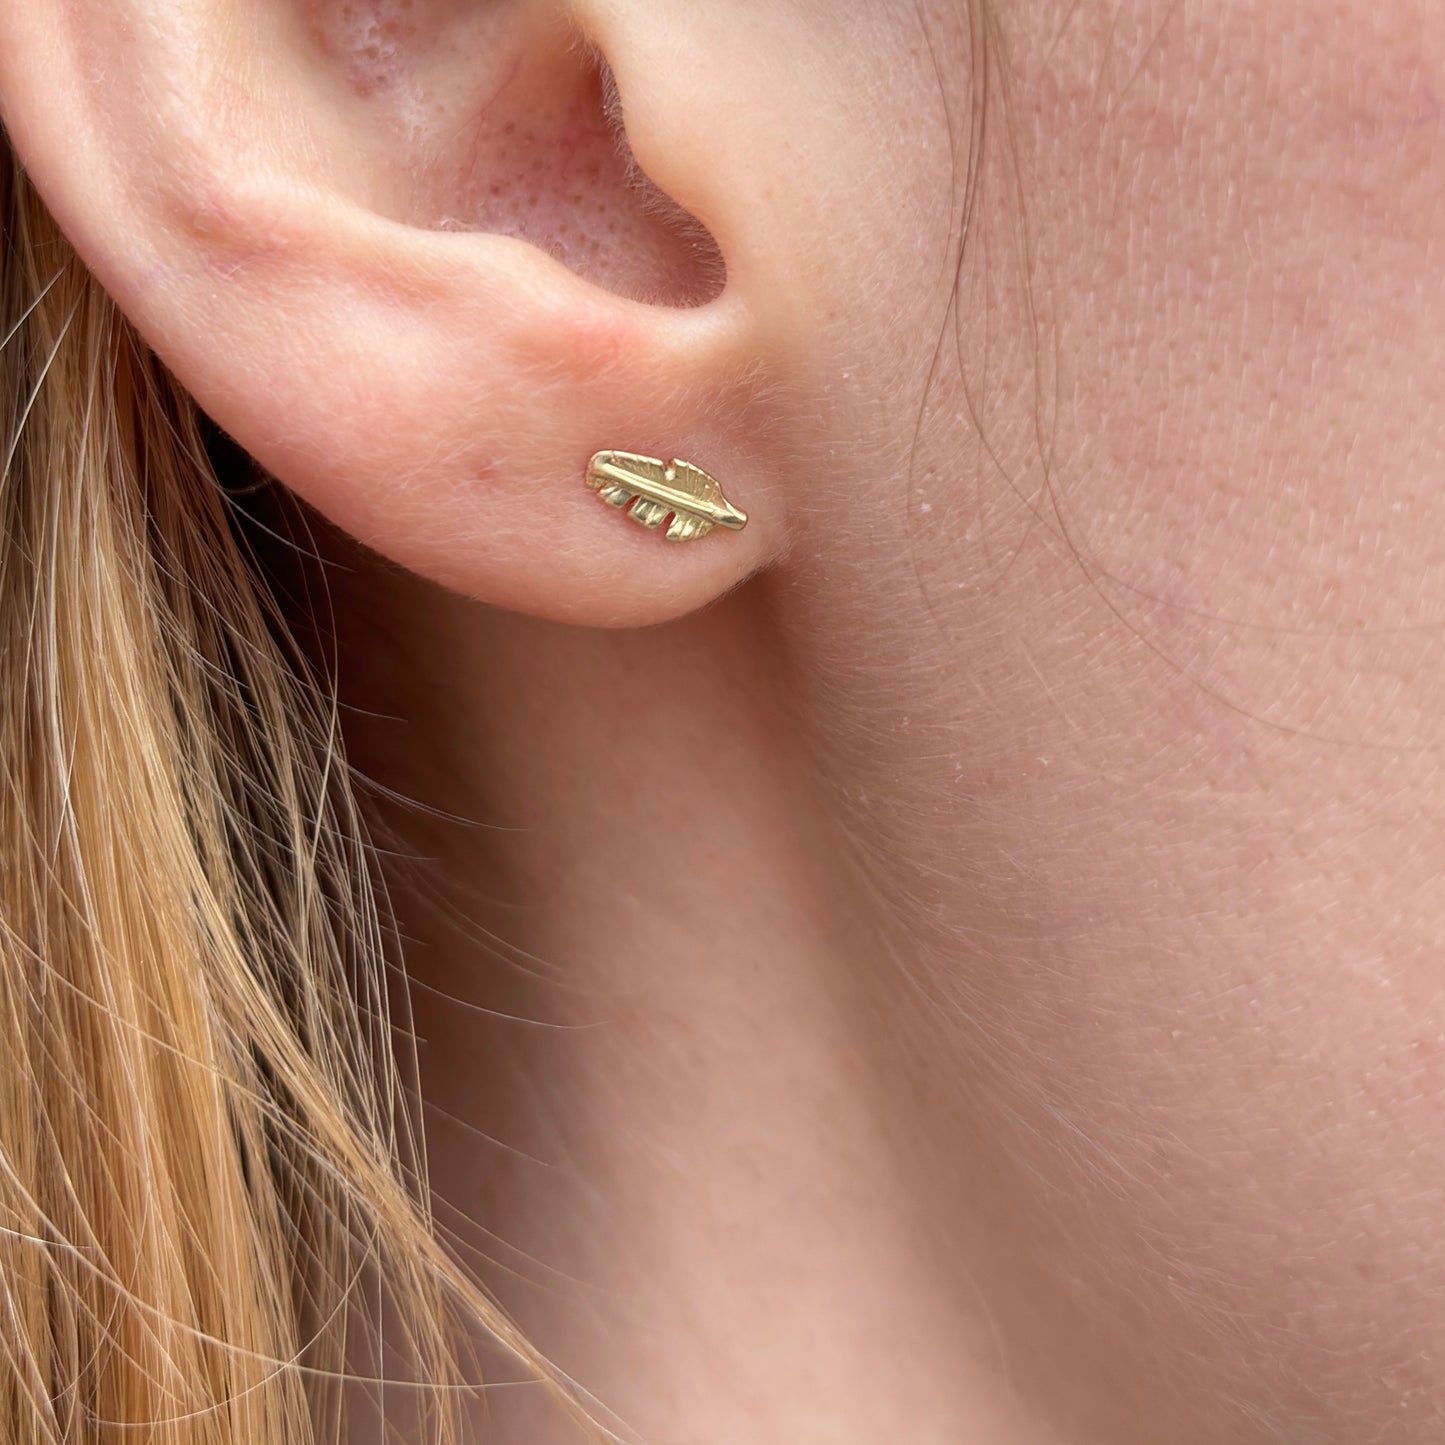 14K Gold Feather Post Earrings